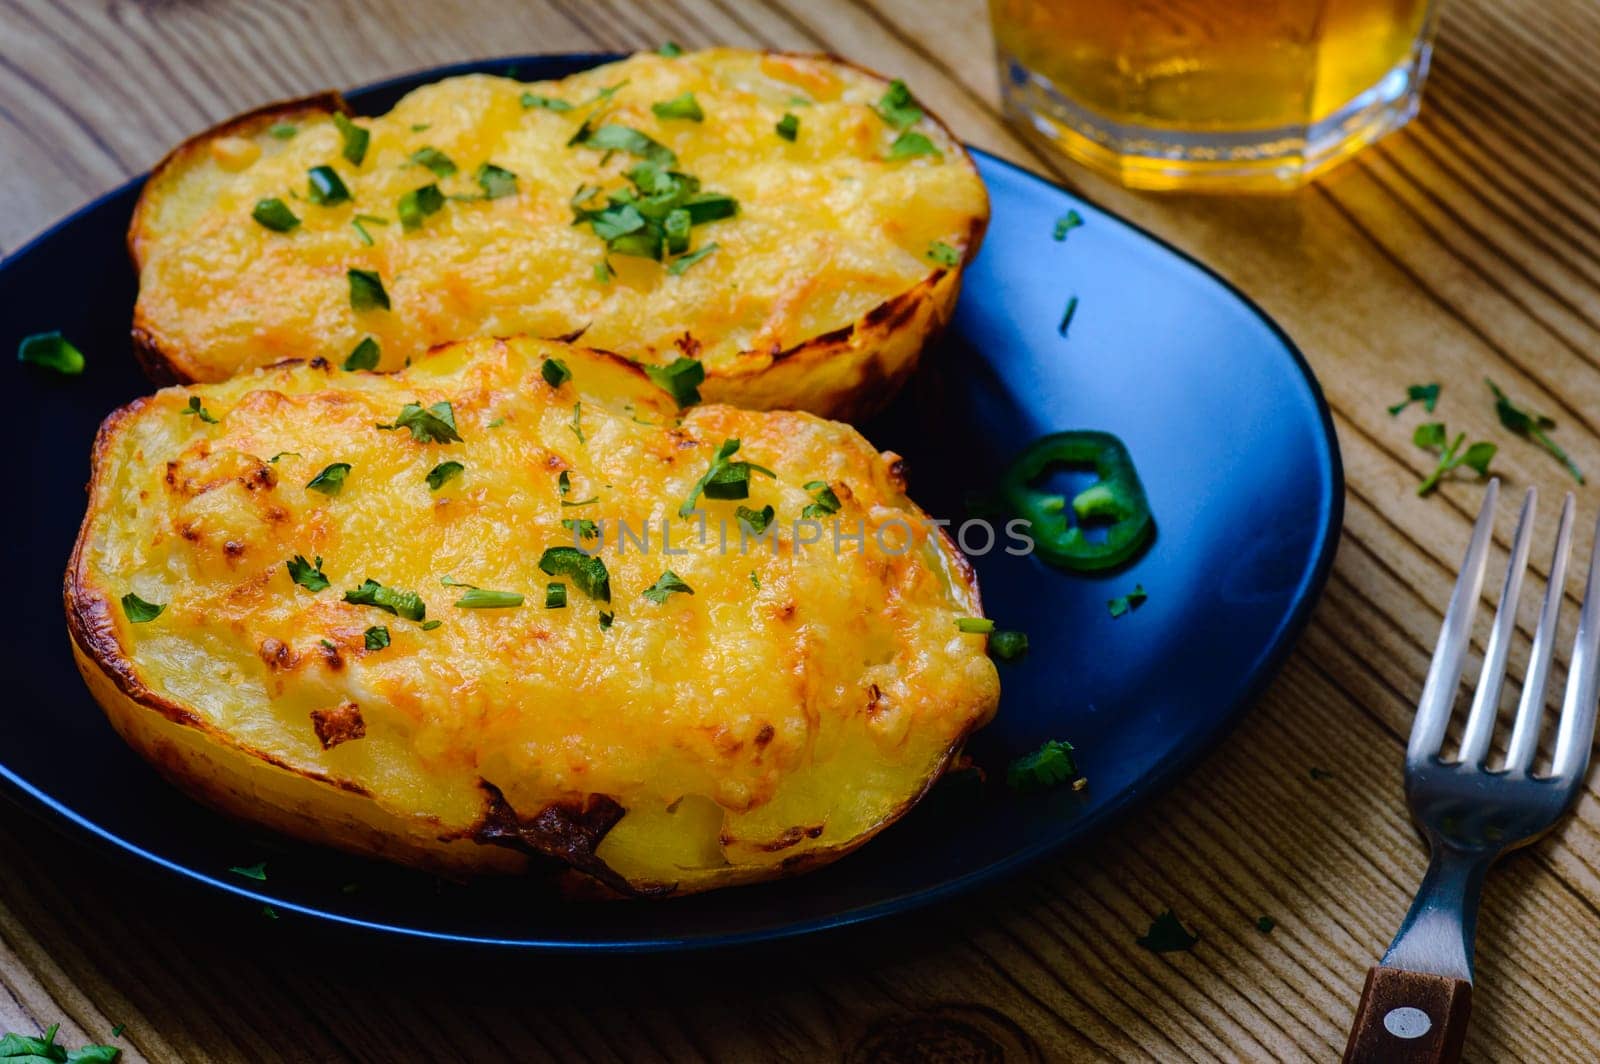 Barbecue Baked Potatoes with Cheese and Sour Cream by RobertPB